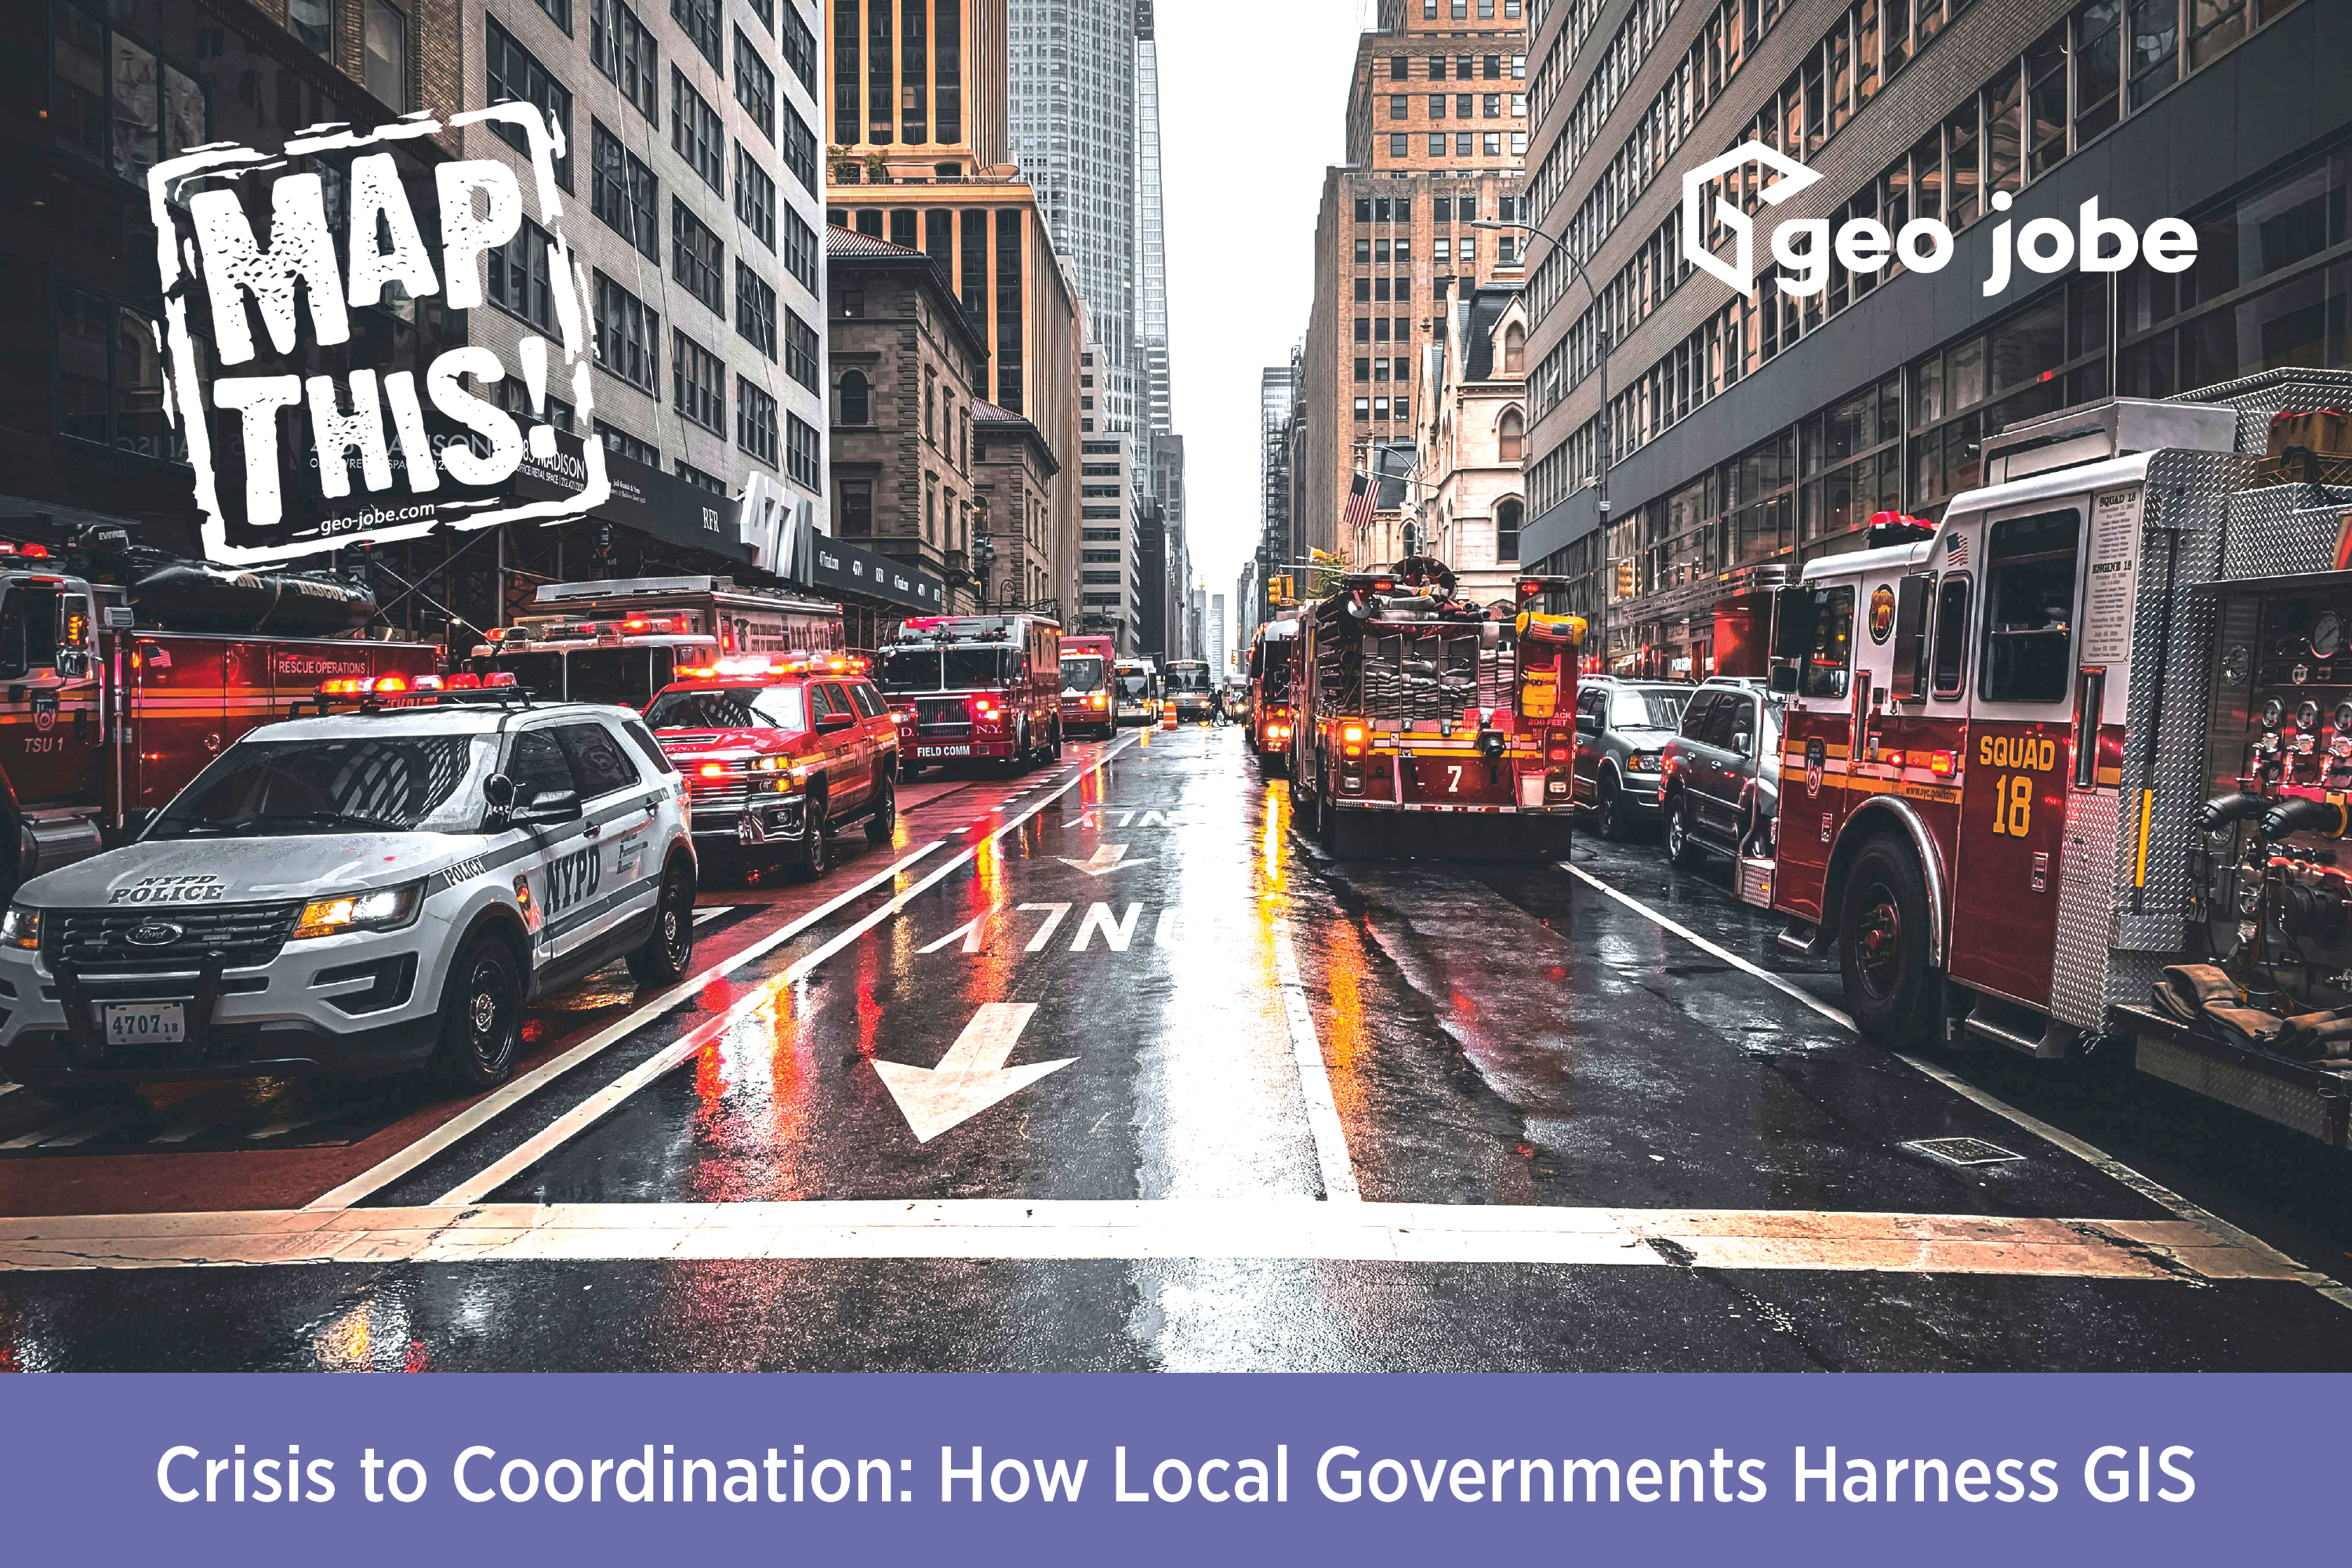 Crisis to Coordination: How Local Governments Harness GIS